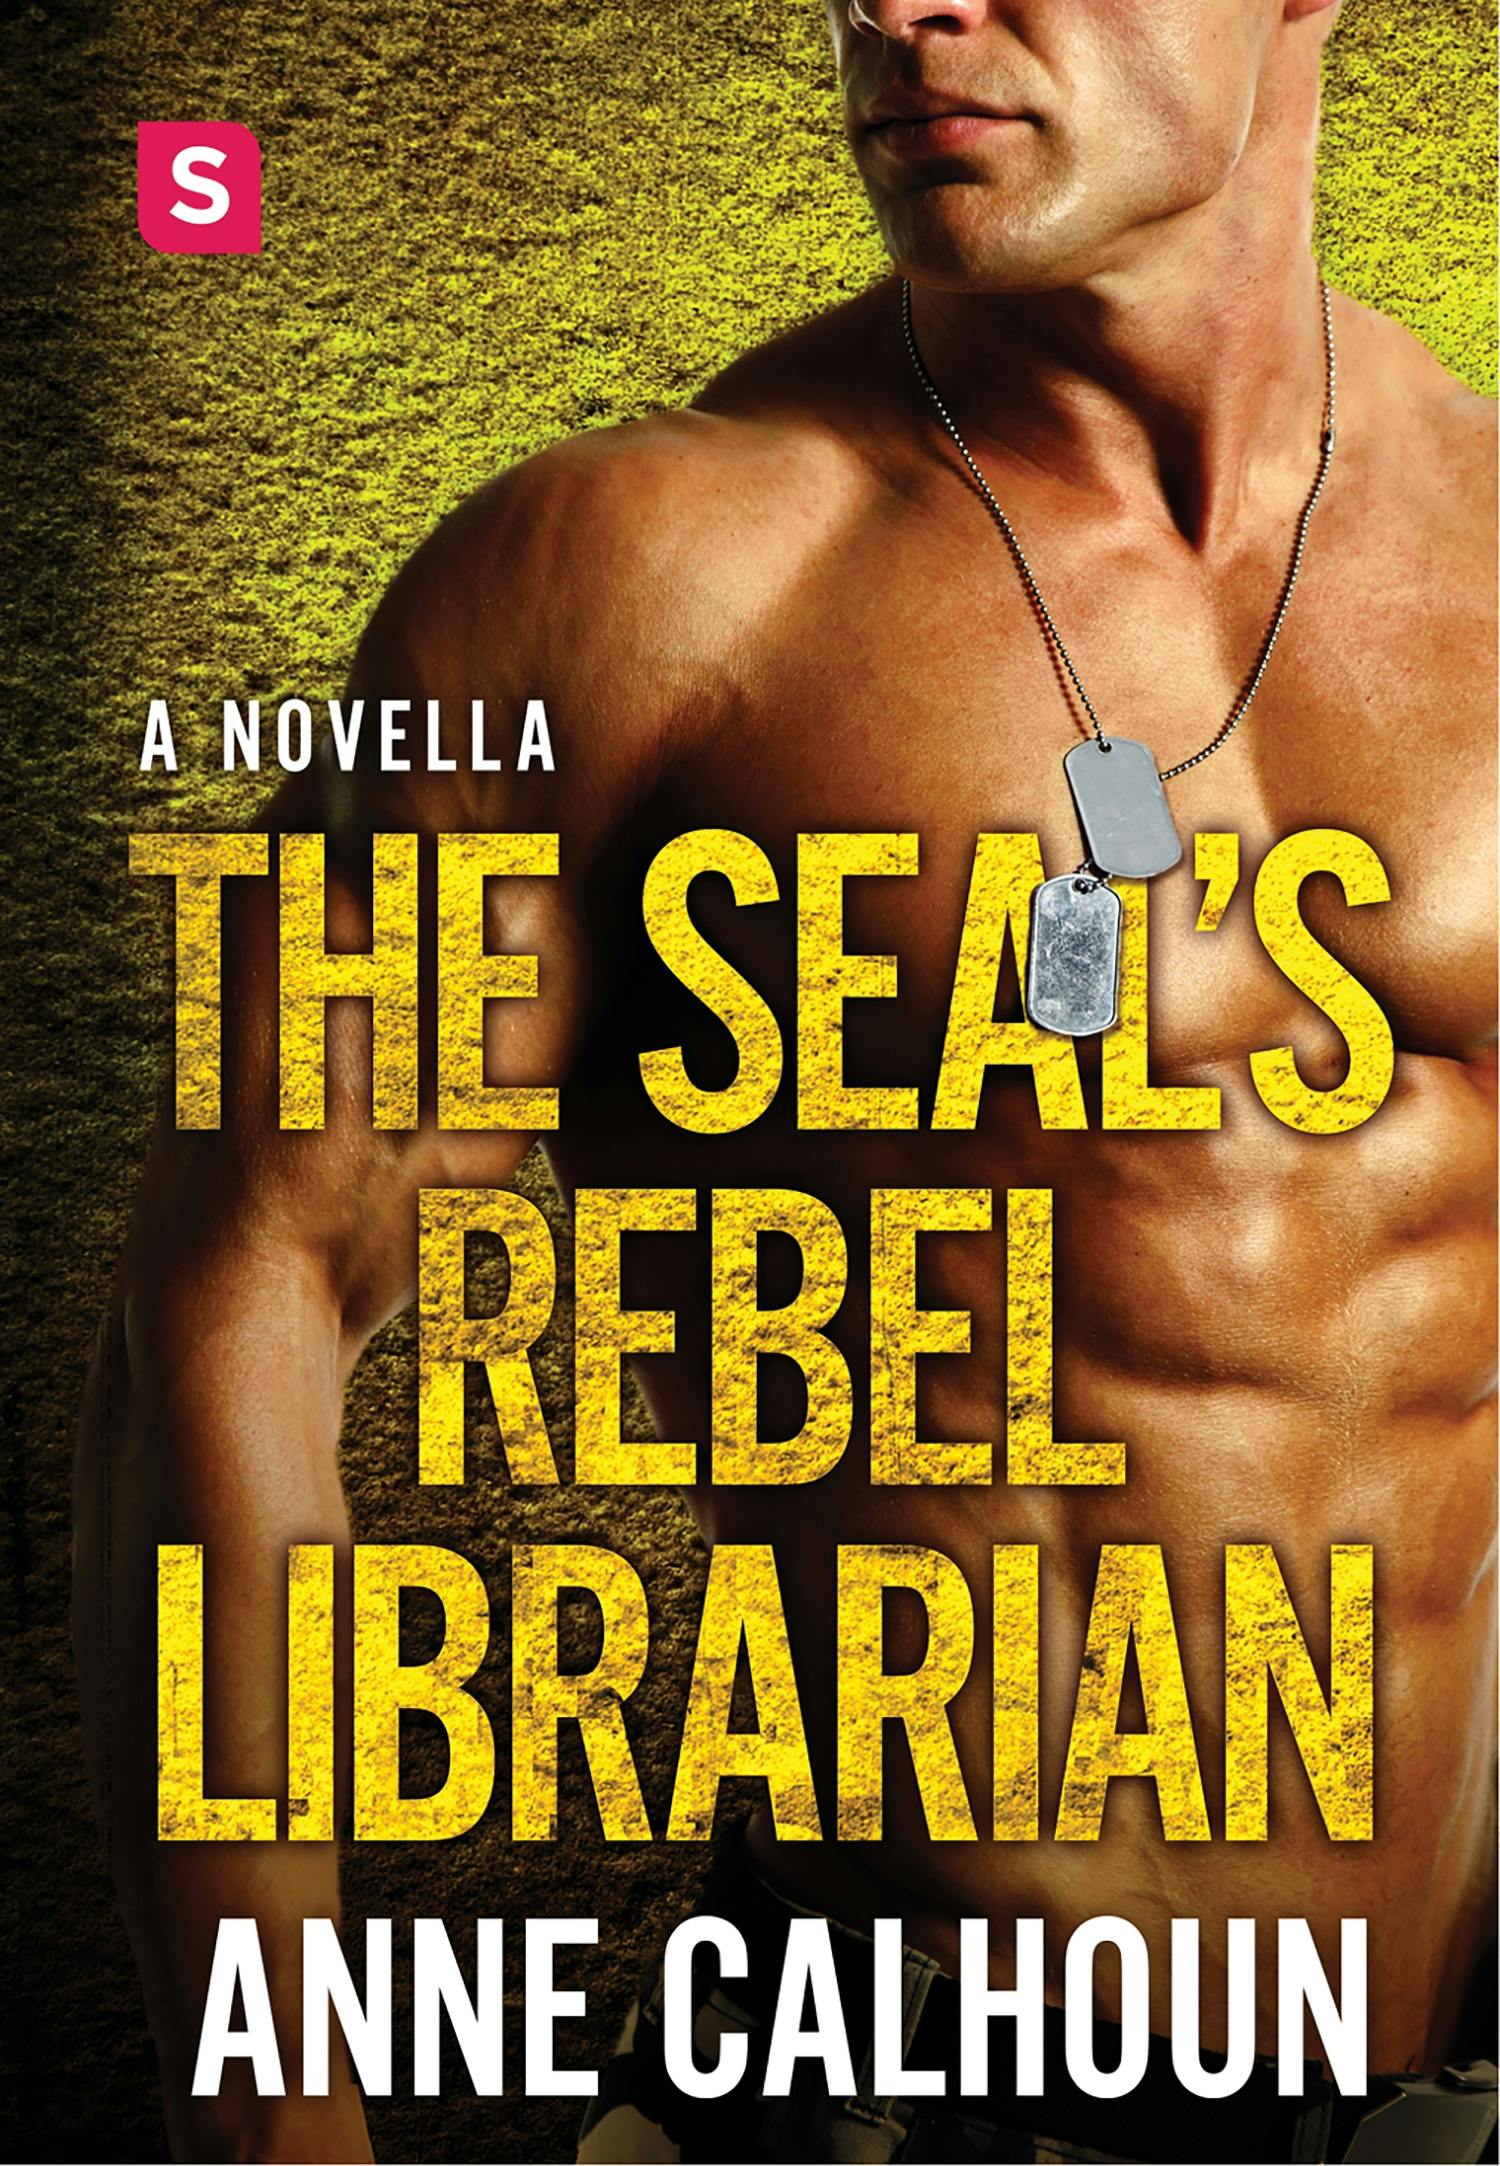 The SEAL's Rebel Librarian